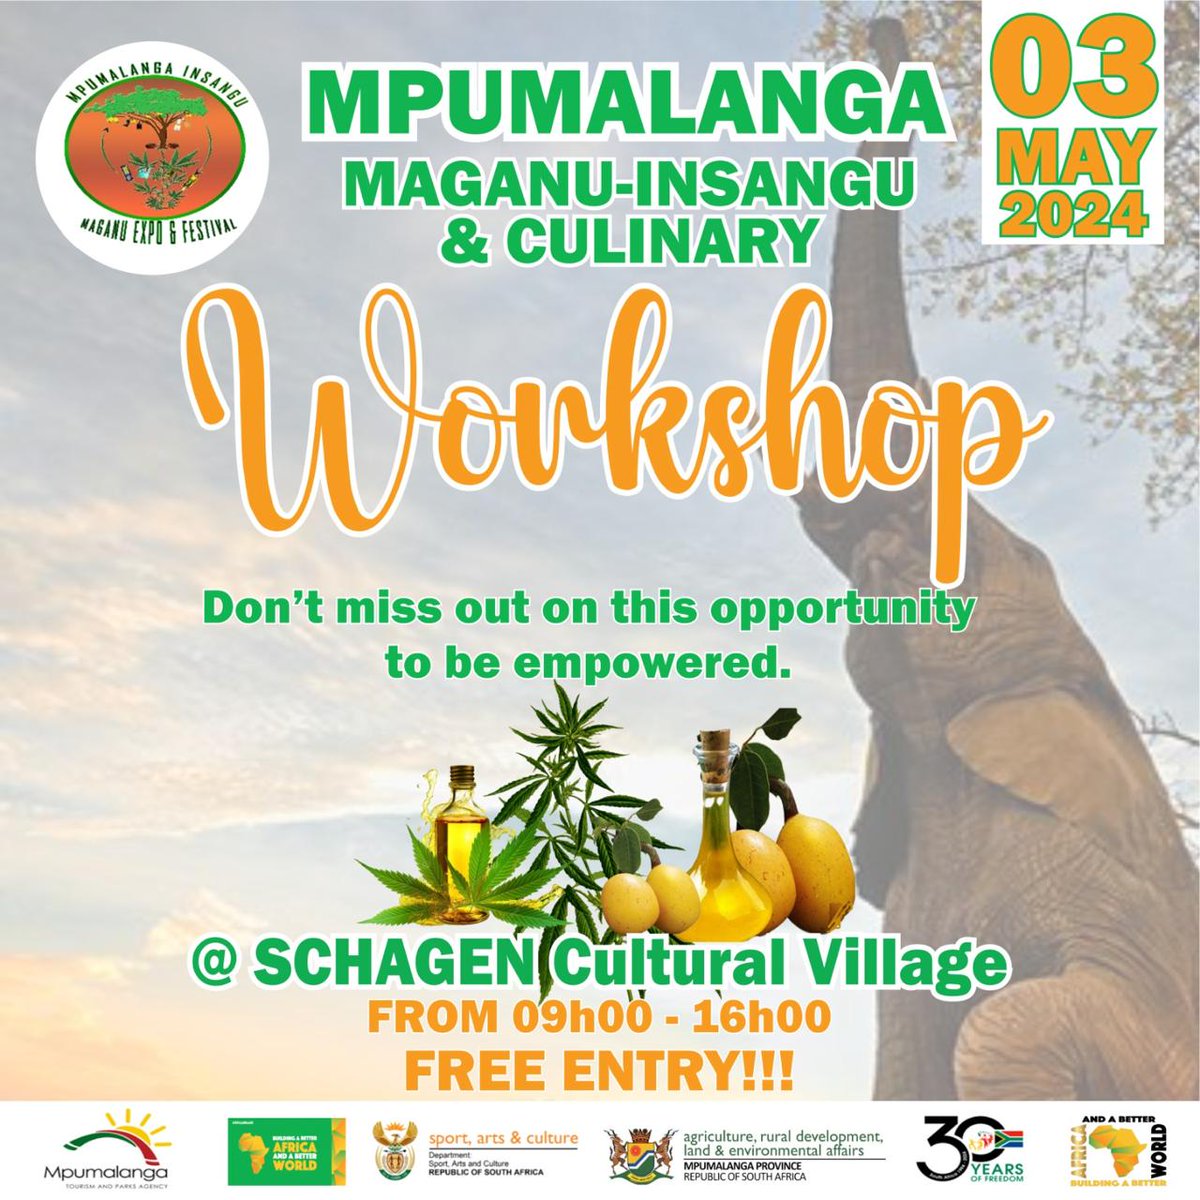 Knowledge is power, don't miss an opportunity to be empowered 🙌 #DiscoverMpumalanga